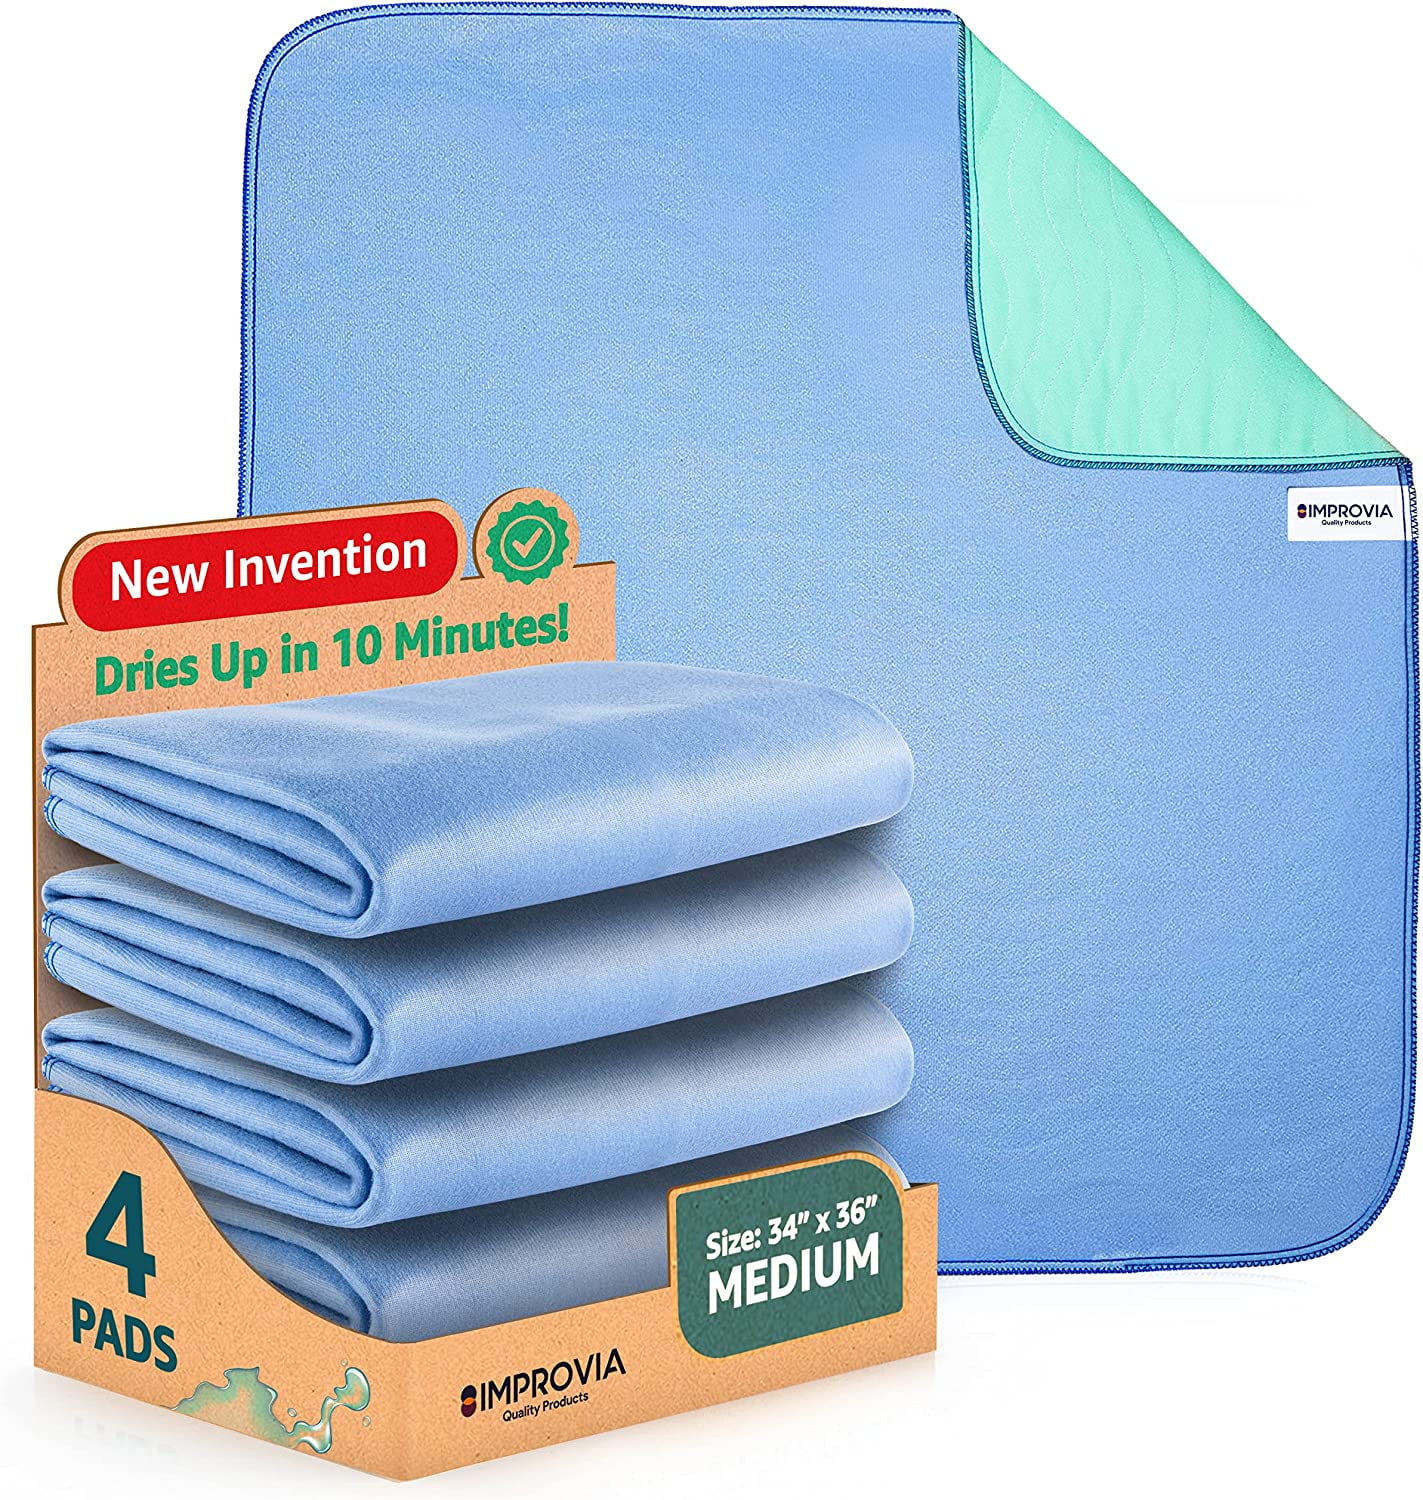 Incontinence Bed Pads Washable Reusable Underpad Bed Mat Anti-Slip 36x34  2Pack